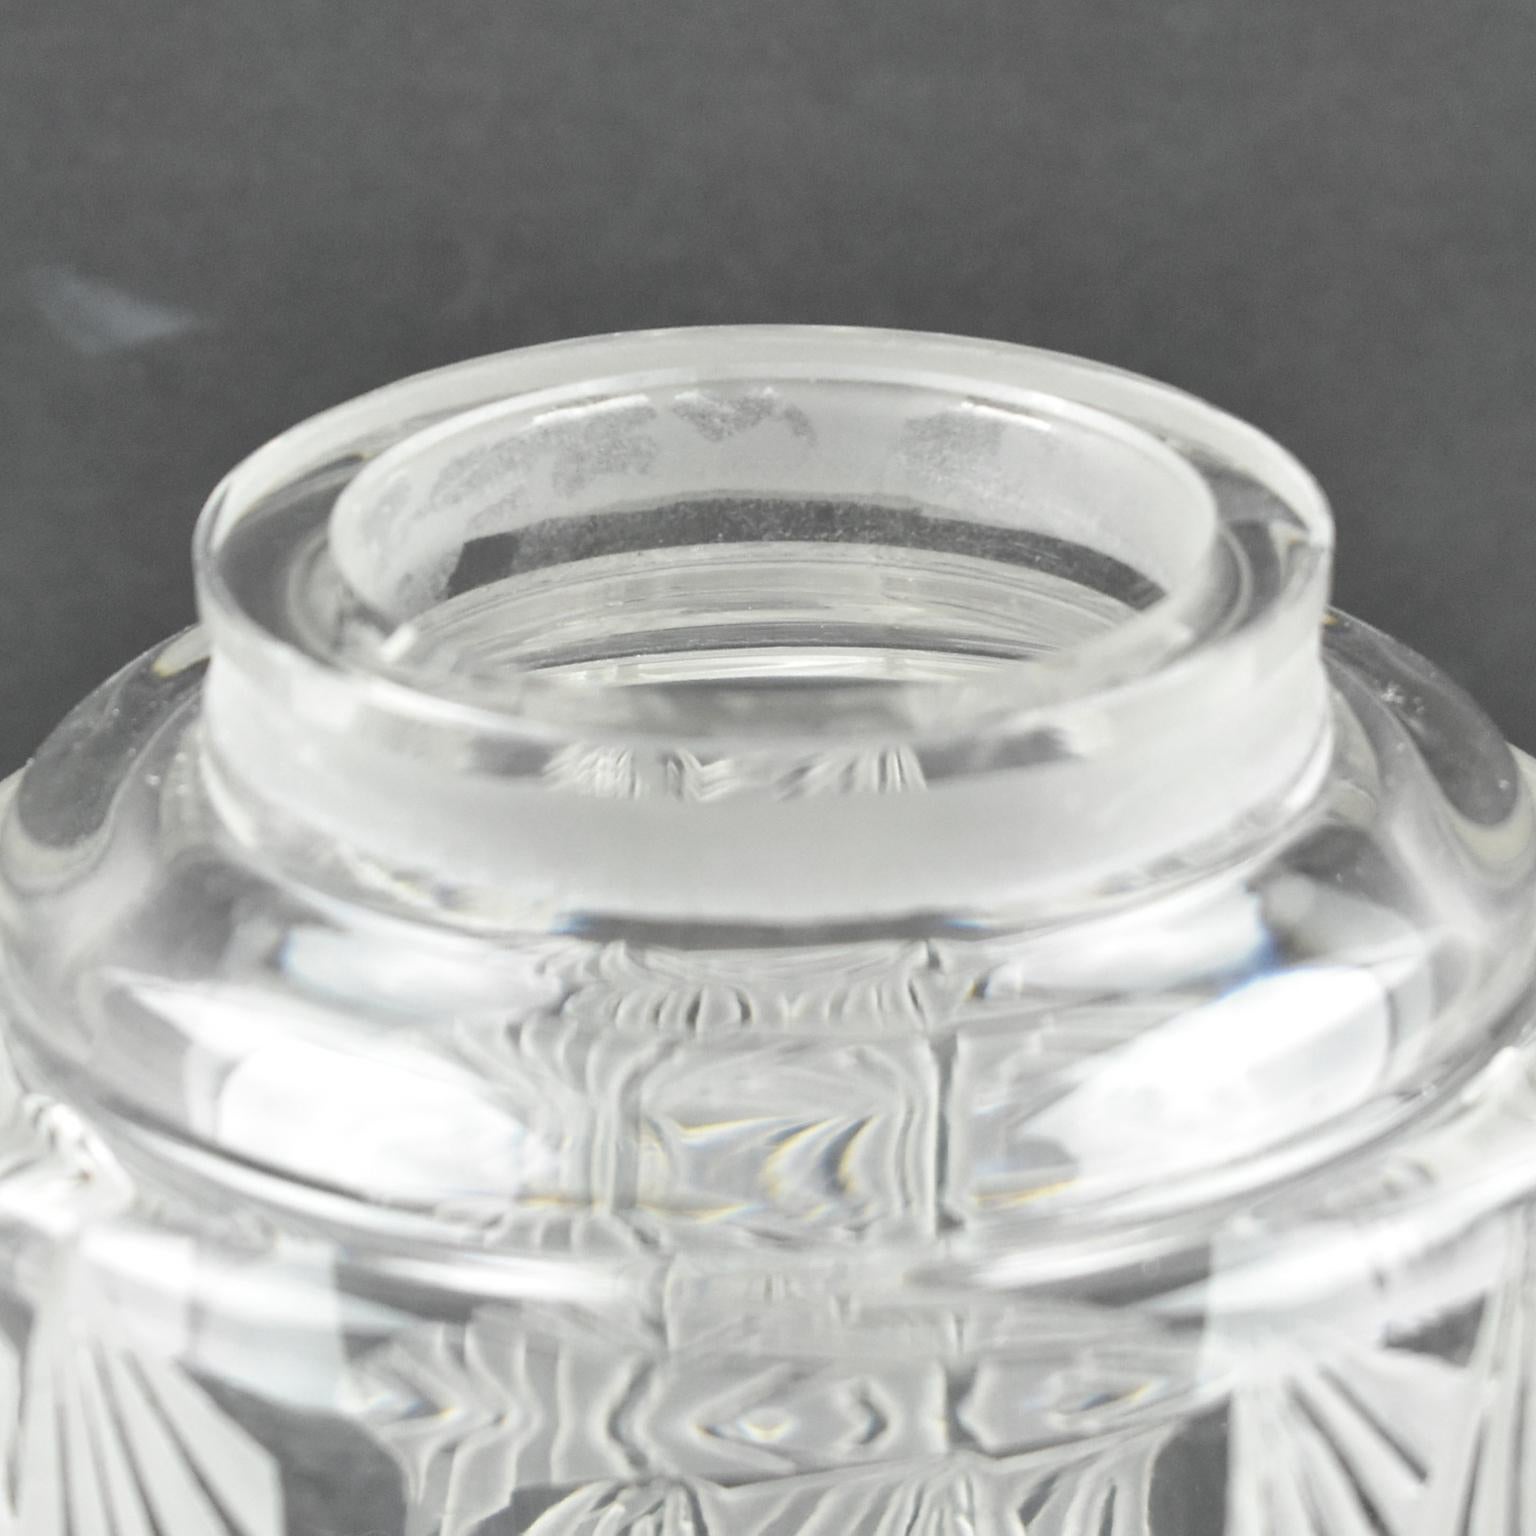 Jean Luce Art Deco Geometric Etched Glass Vase, France 1930s For Sale 2